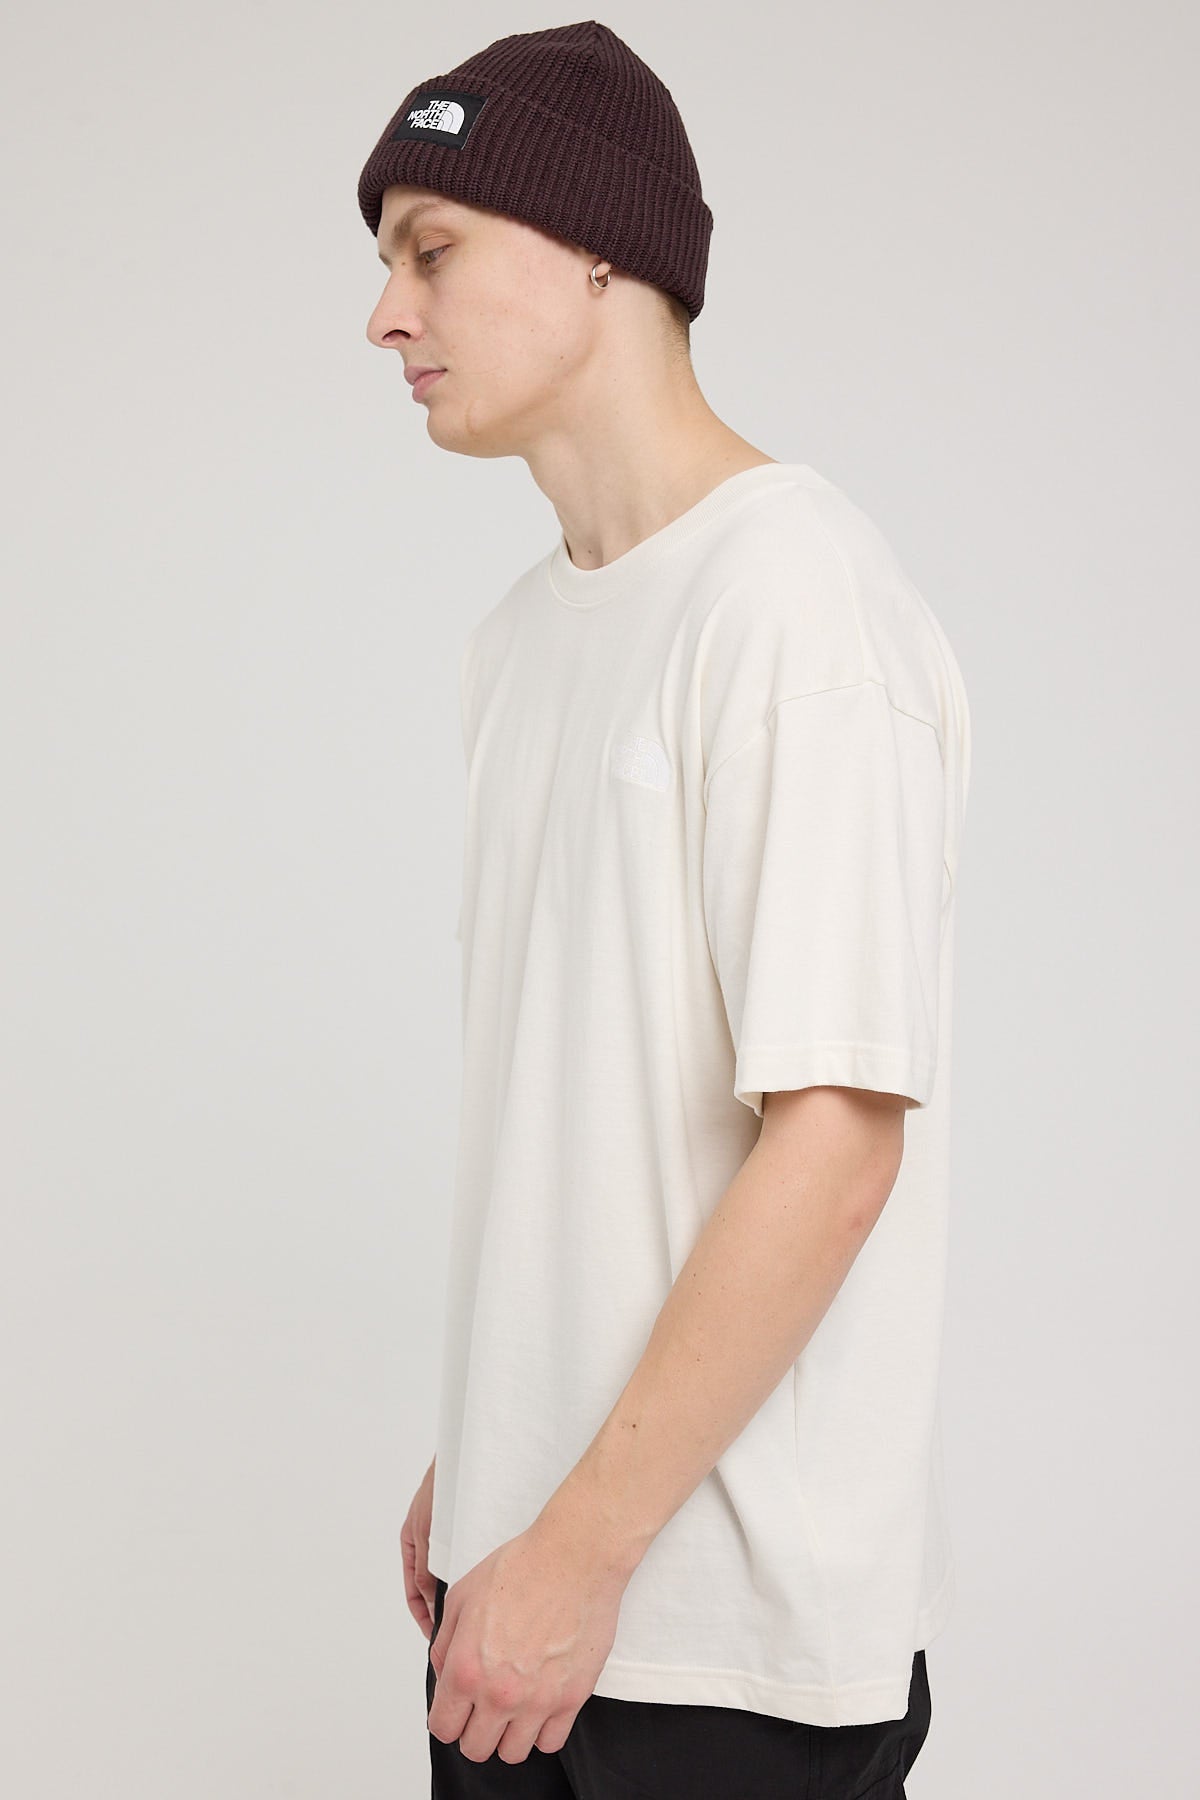 The North Face Evolution Box Fit Tee White Dune